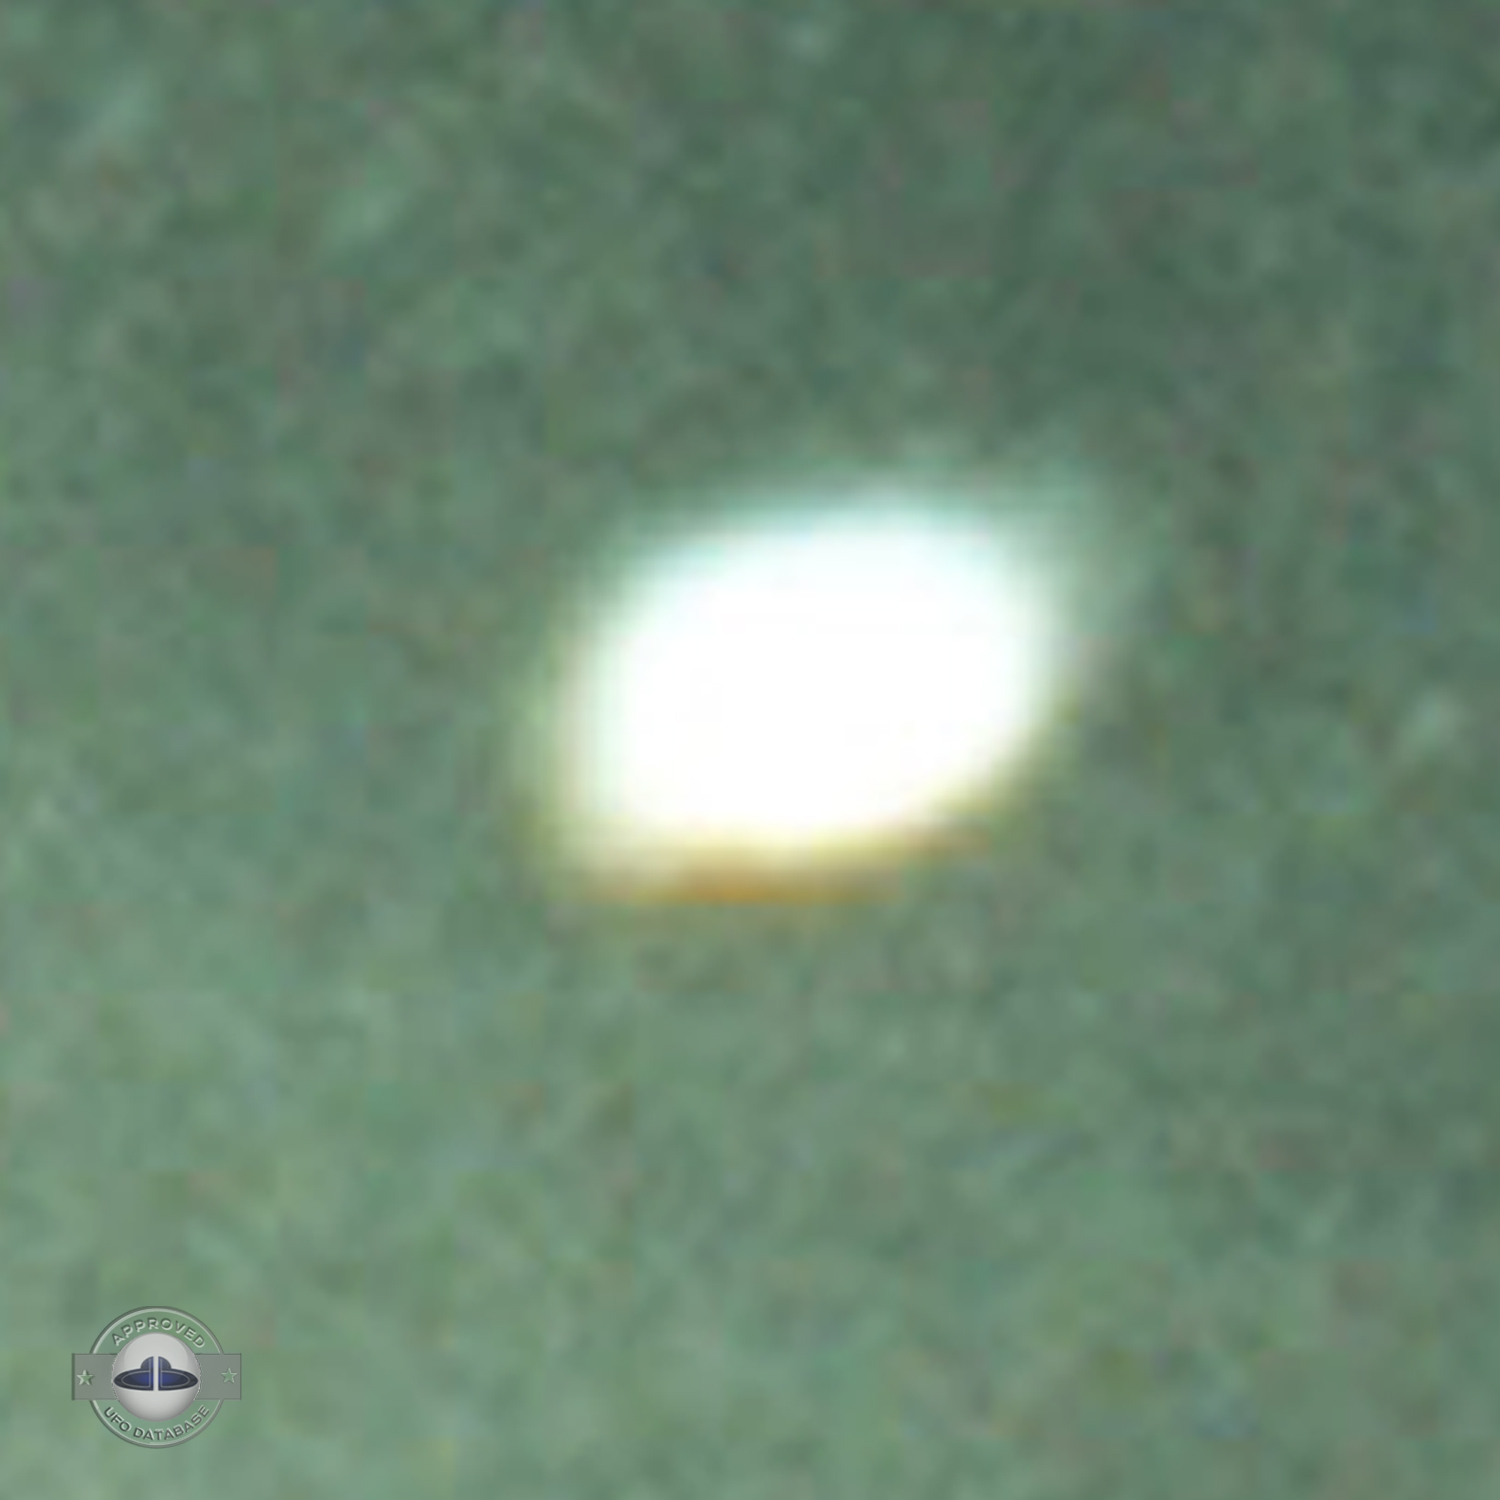 8 UFOs over Ashoka Ashram in Mehrauli India | 1964 | by Billy Meier UFO Picture #177-6